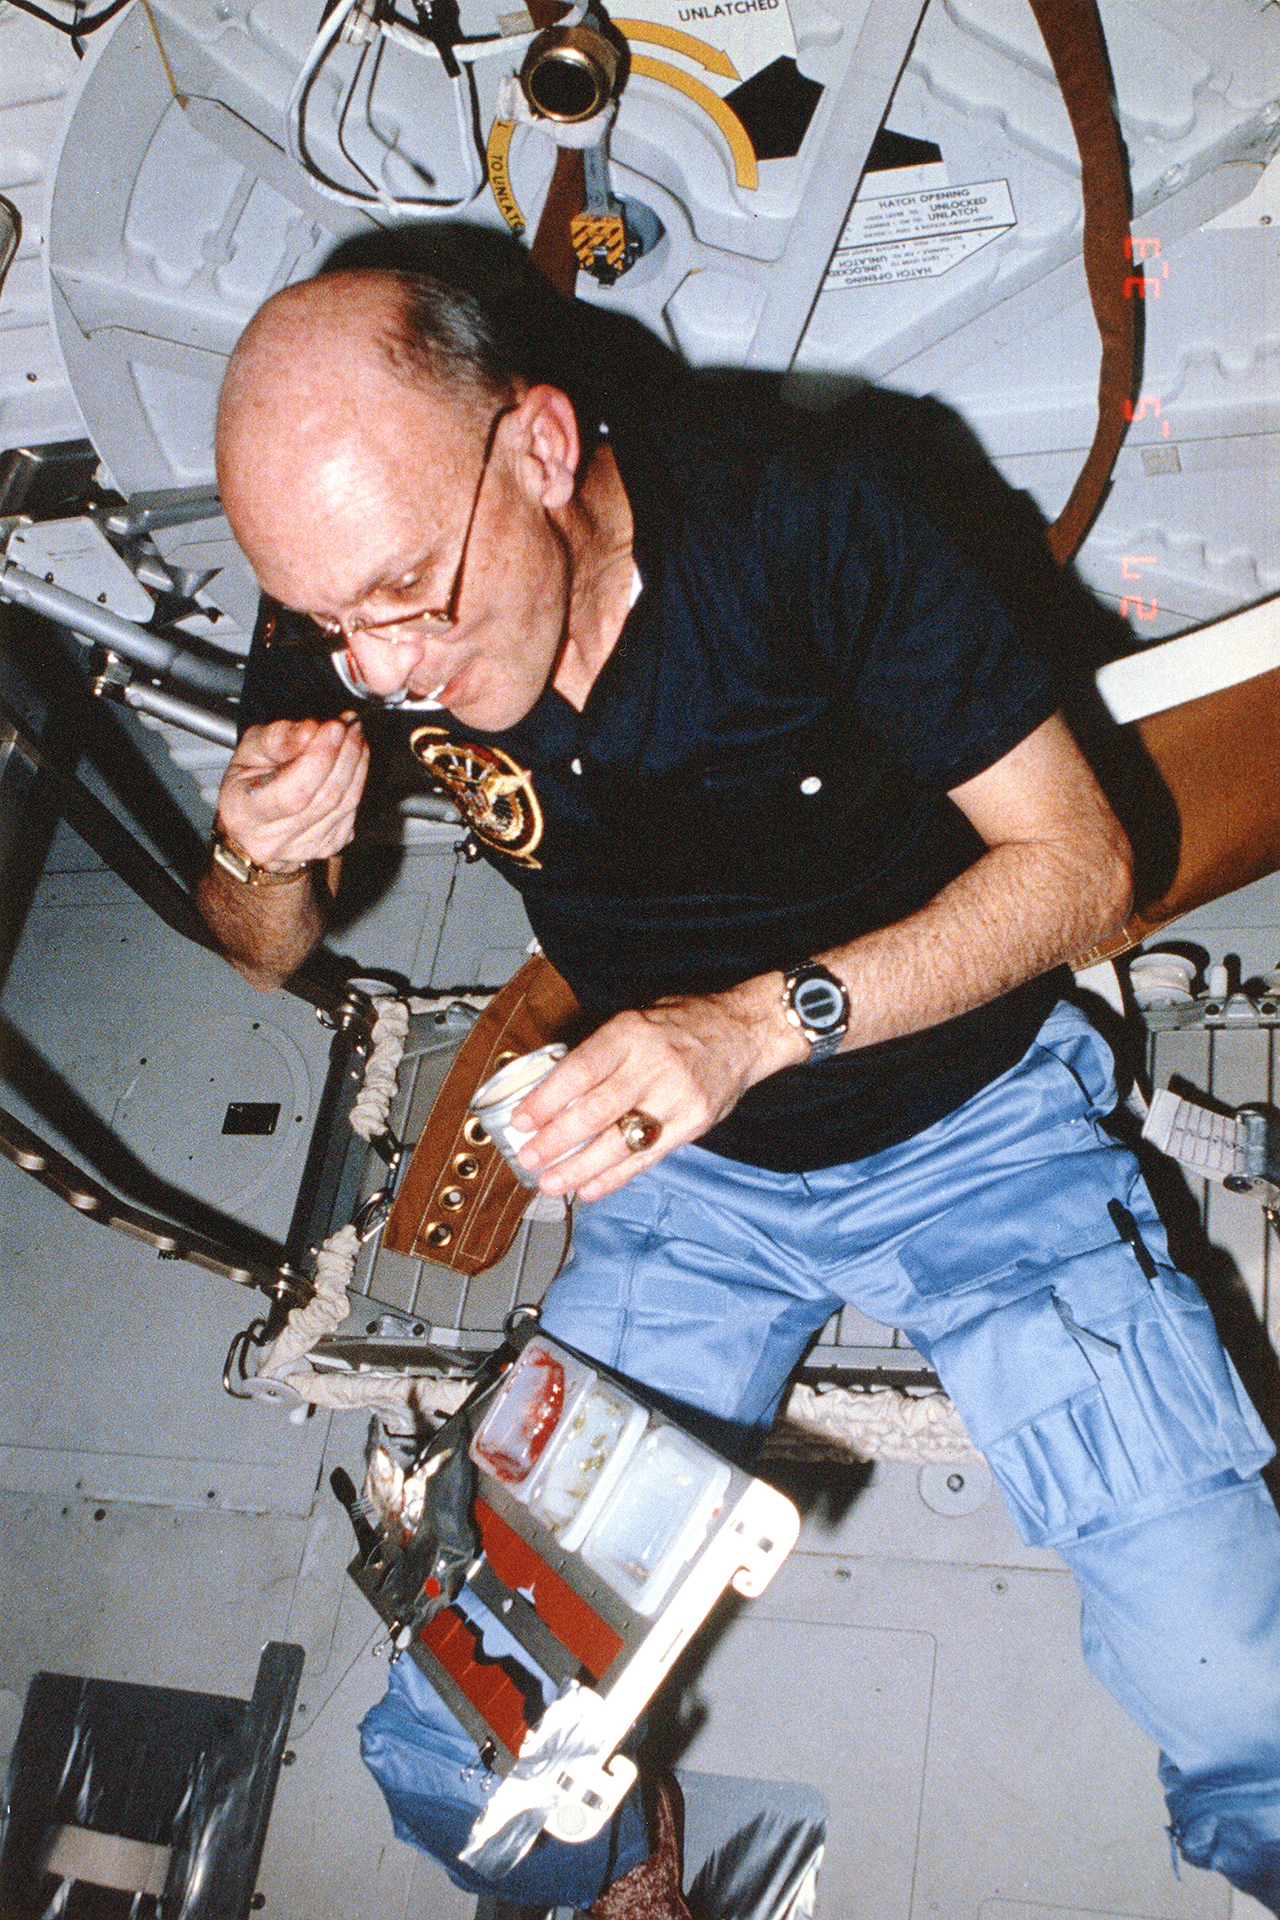 a man in a blue shirt eats while floating inside a white-walled spacecraft.